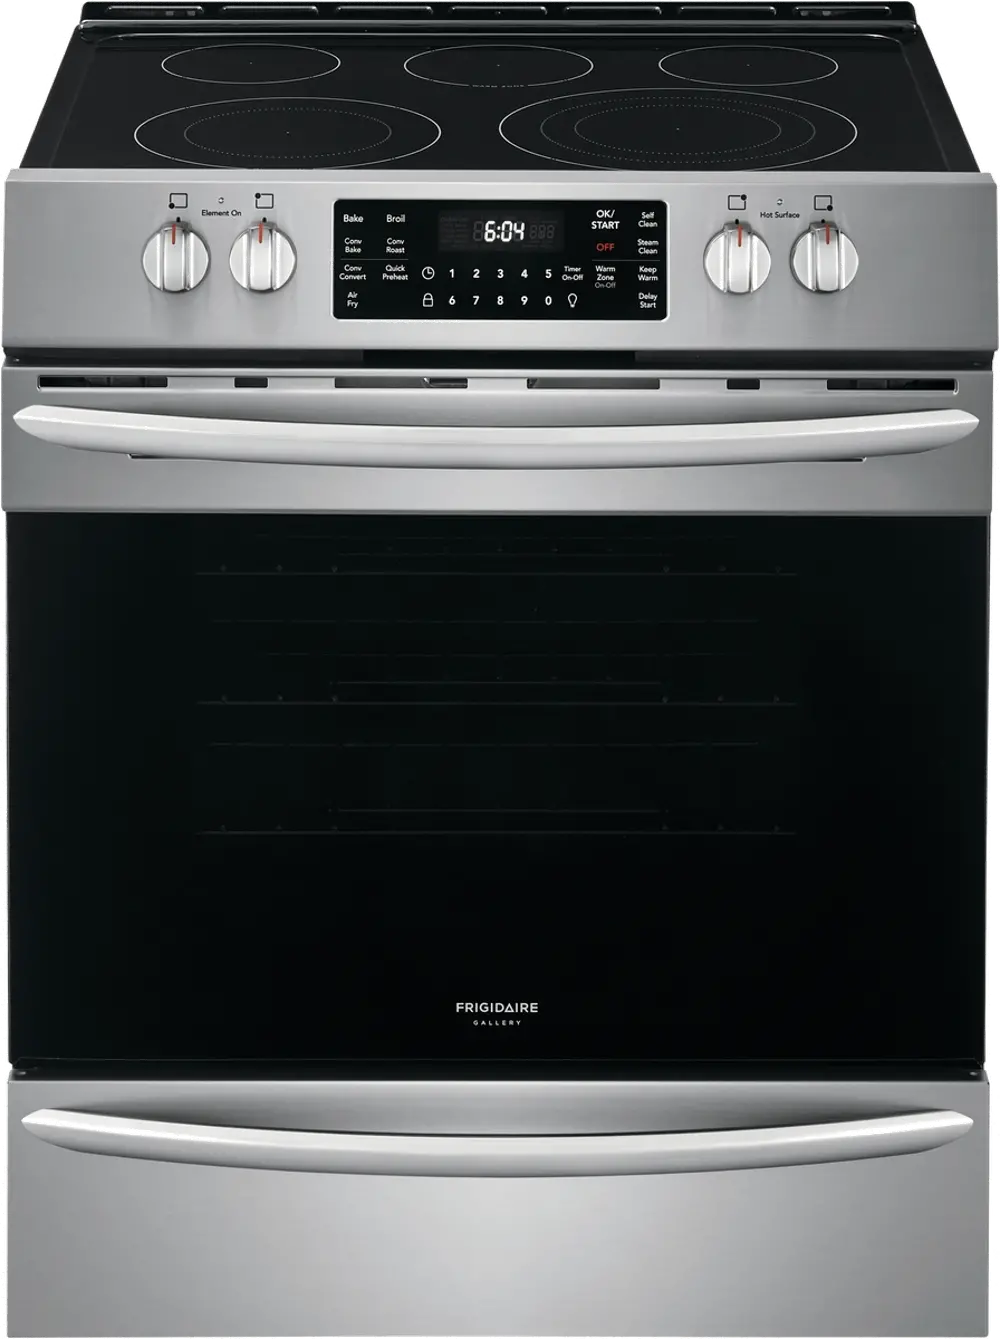 FGEH3047VF Frigidaire 5.4 cu ft Electric Range - Stainless Steel-1